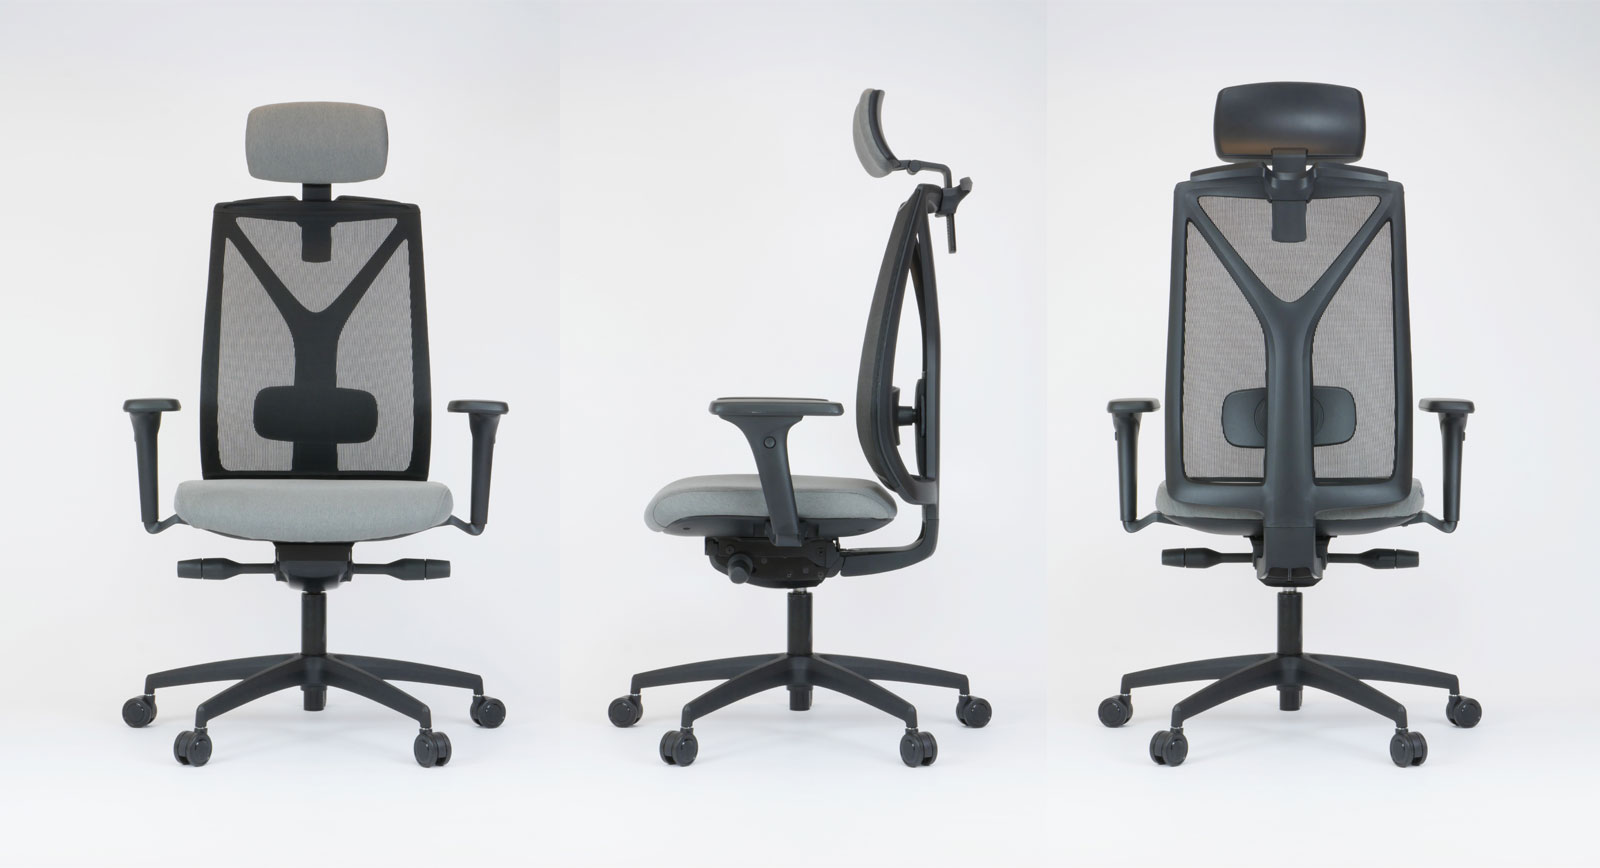 Configure your Modena task chair with a sliding seat, armrests, headrest and coat hanger